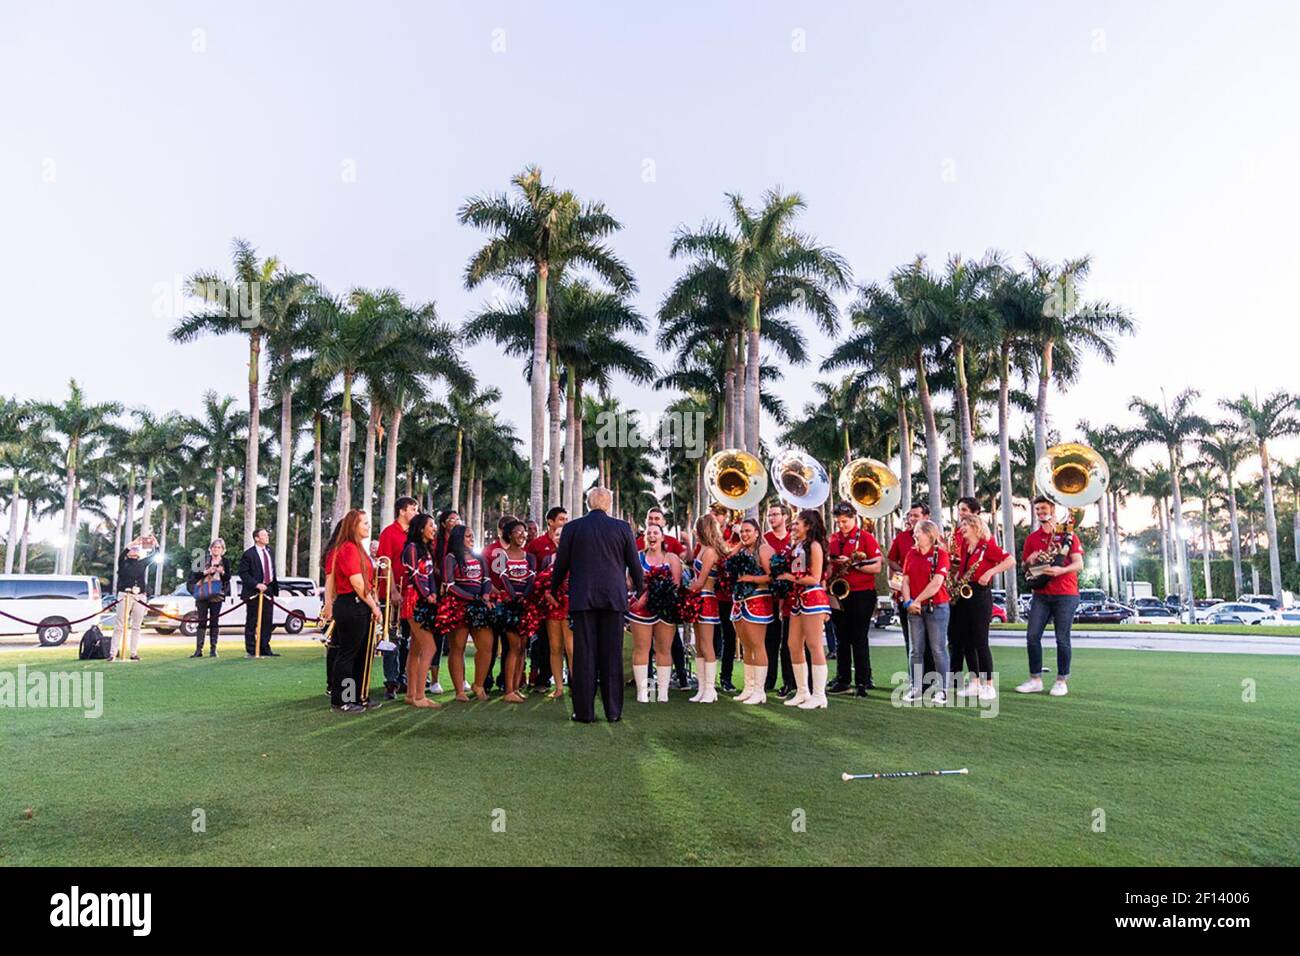 President Donald Trump thanks members of the Florida Atlantic University marching band for their performance Sunday evening Feb. 2 2020 outside the Trump International Golf Club in West Palm Beach Fla. prior to President Trump attending a Super Bowl party. Stock Photo